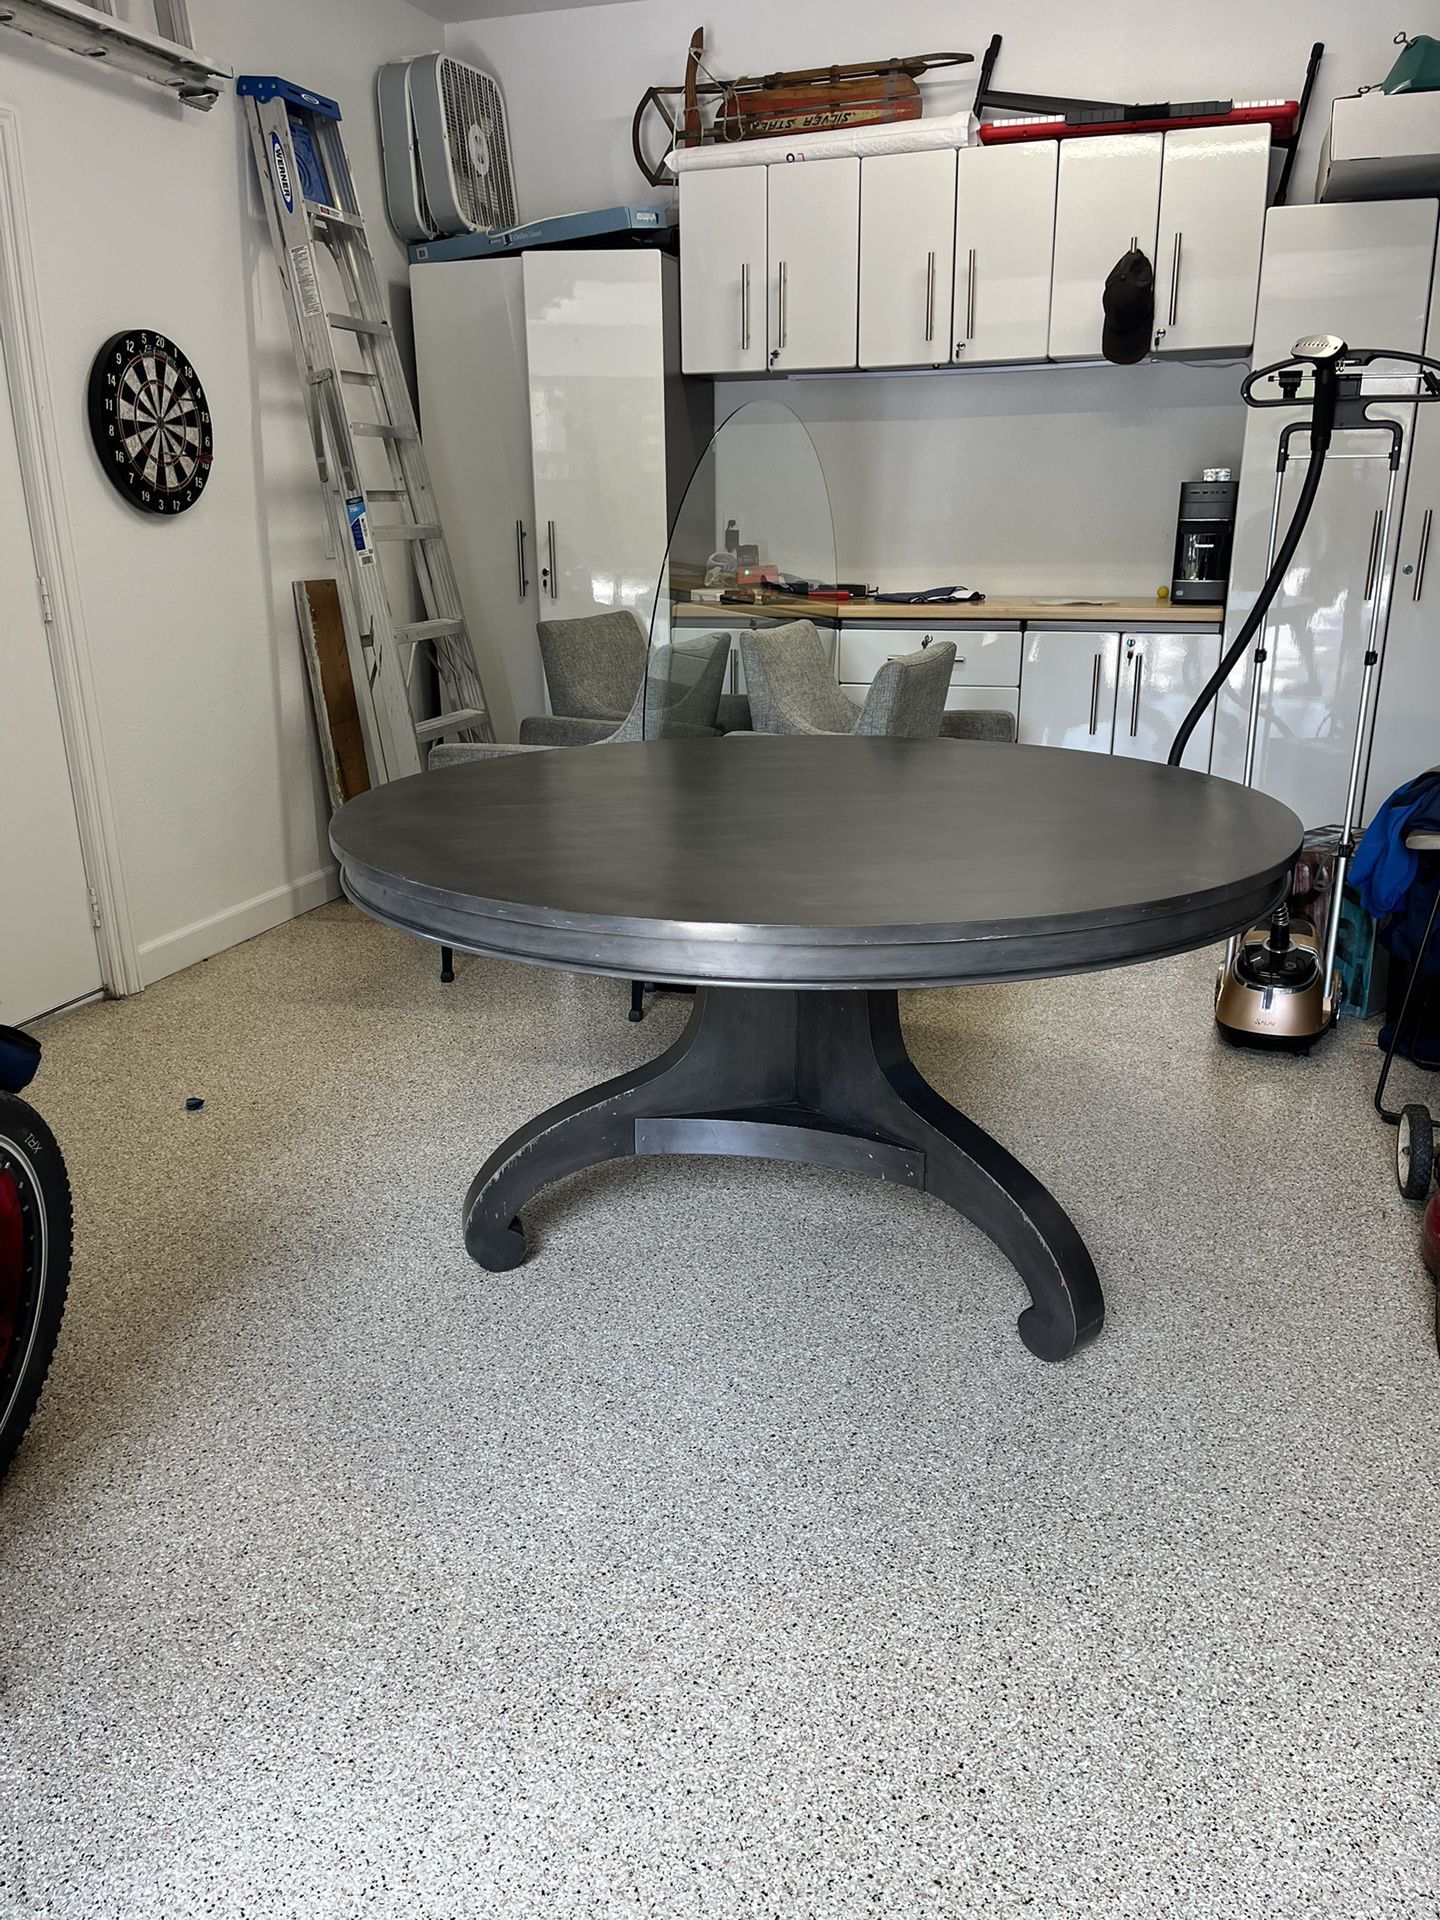 60” Round Table and 6 Chairs